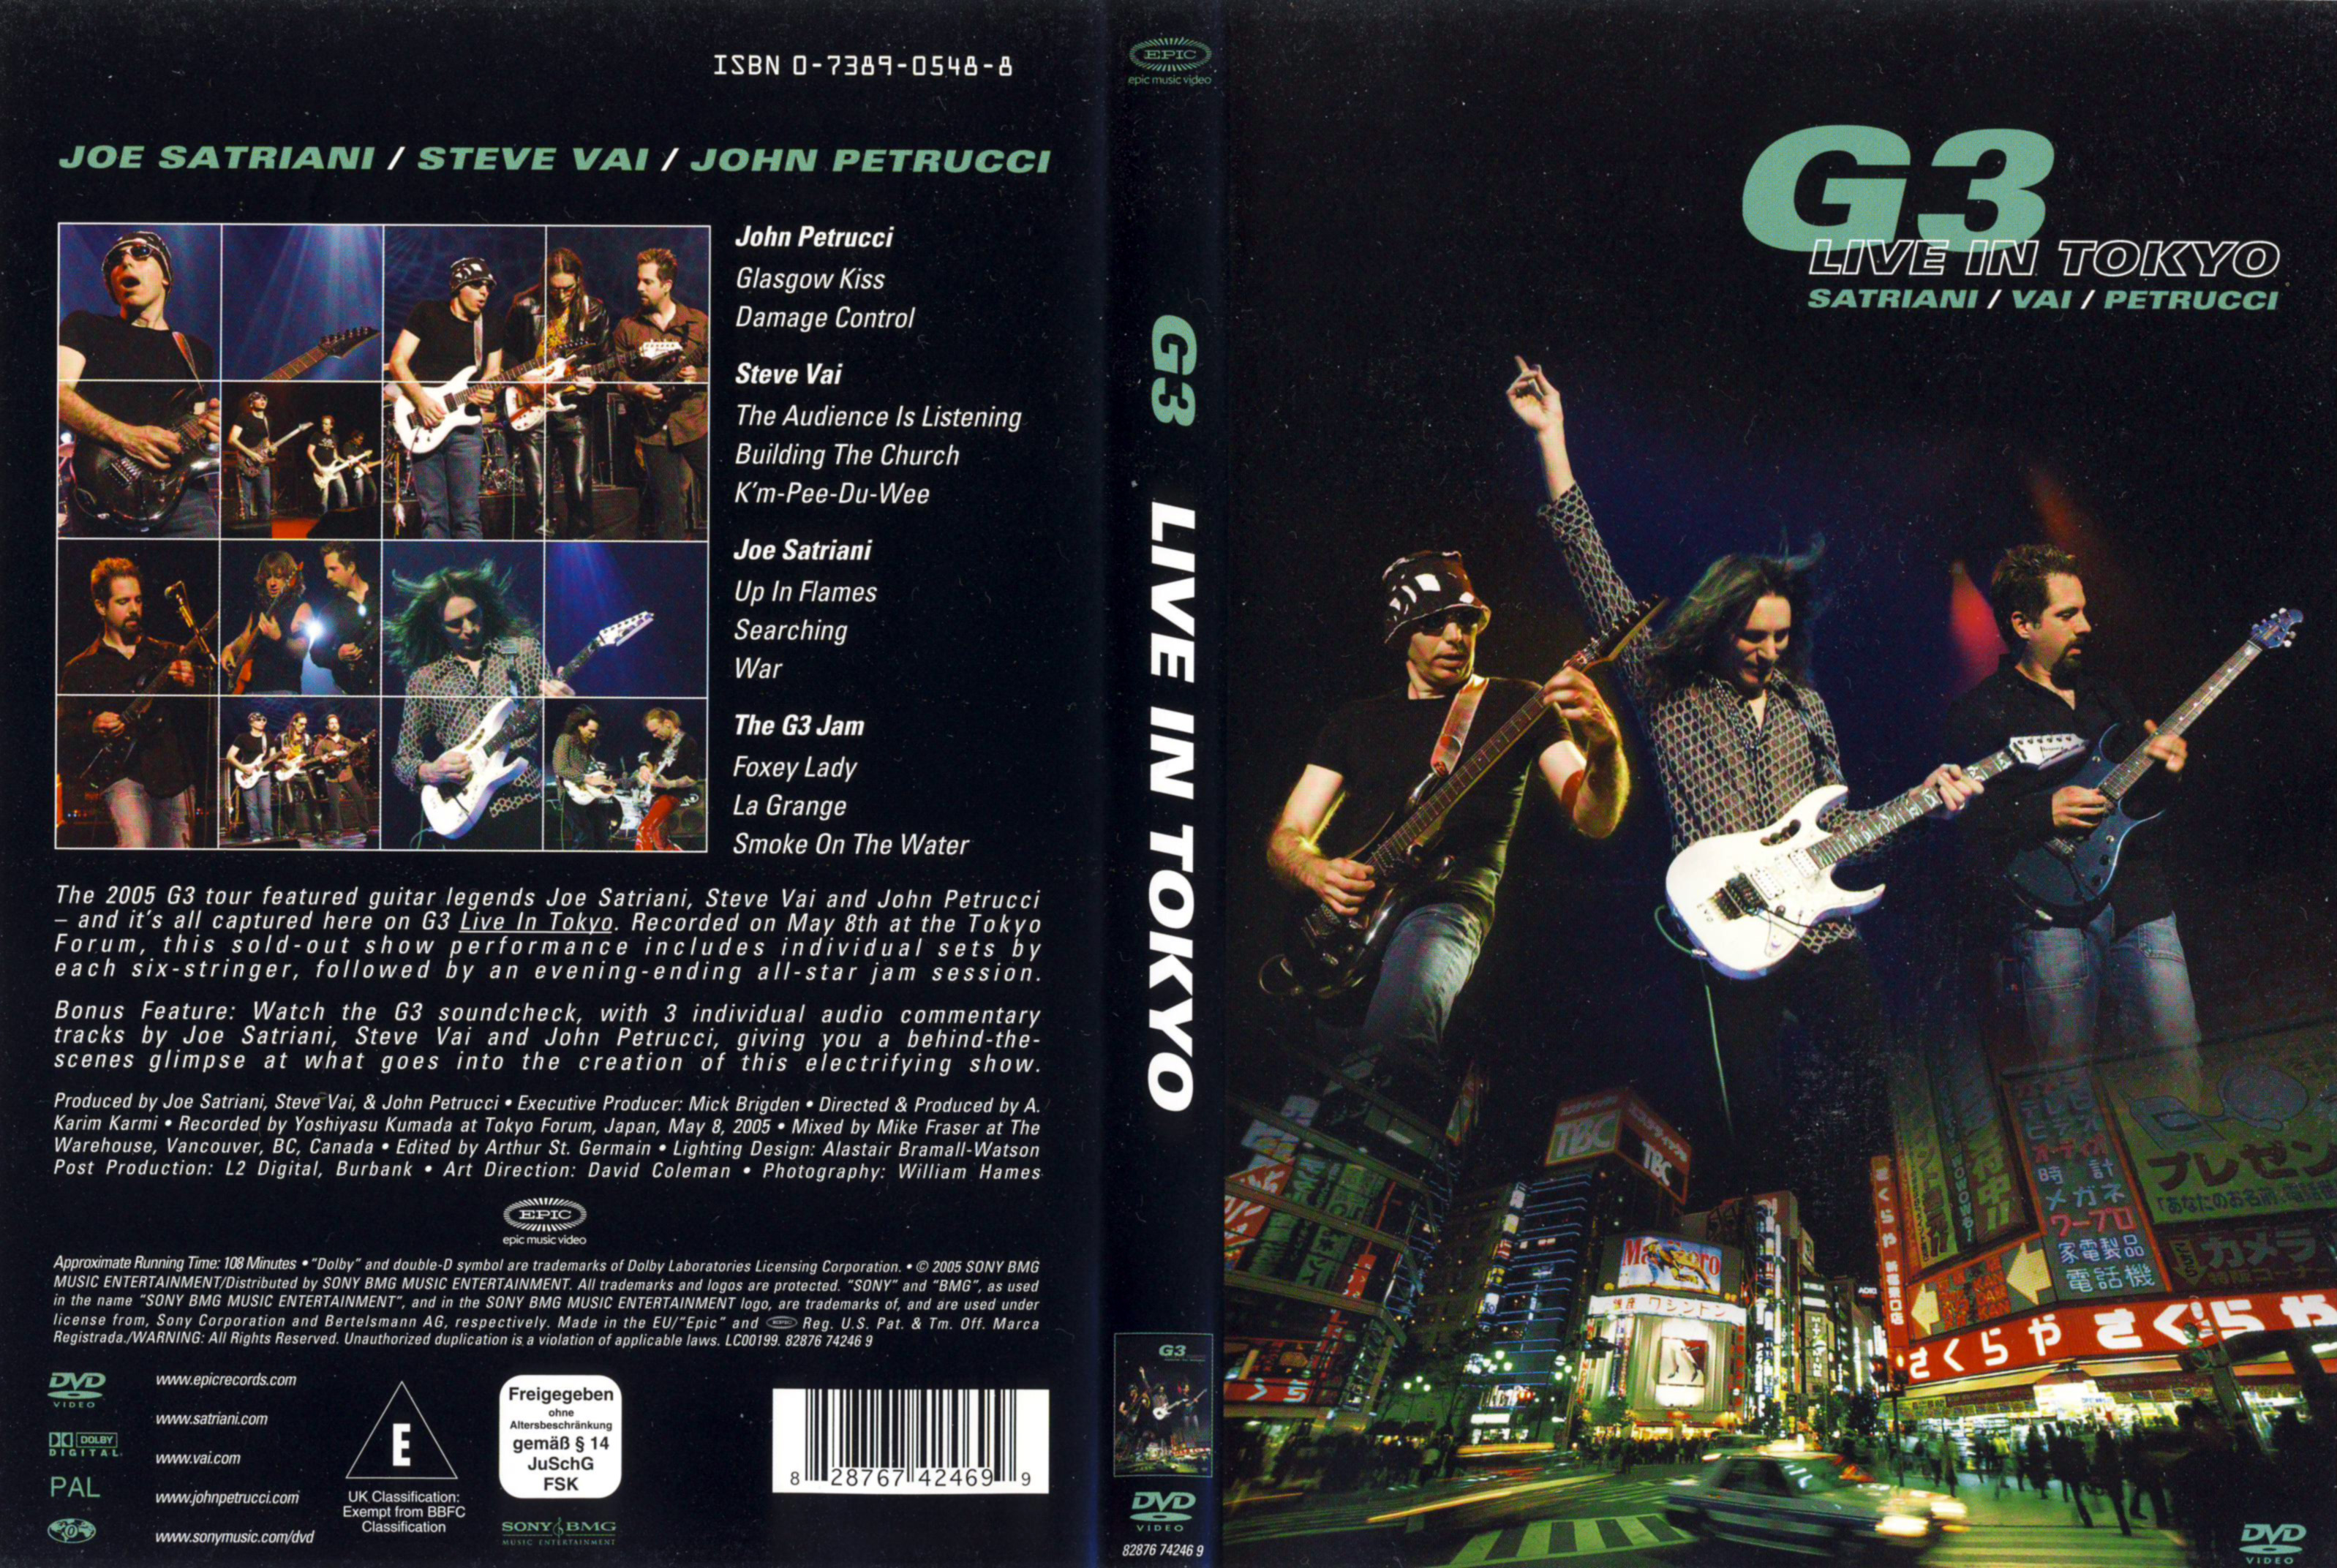 Jaquette DVD G3 Live in Tokyo